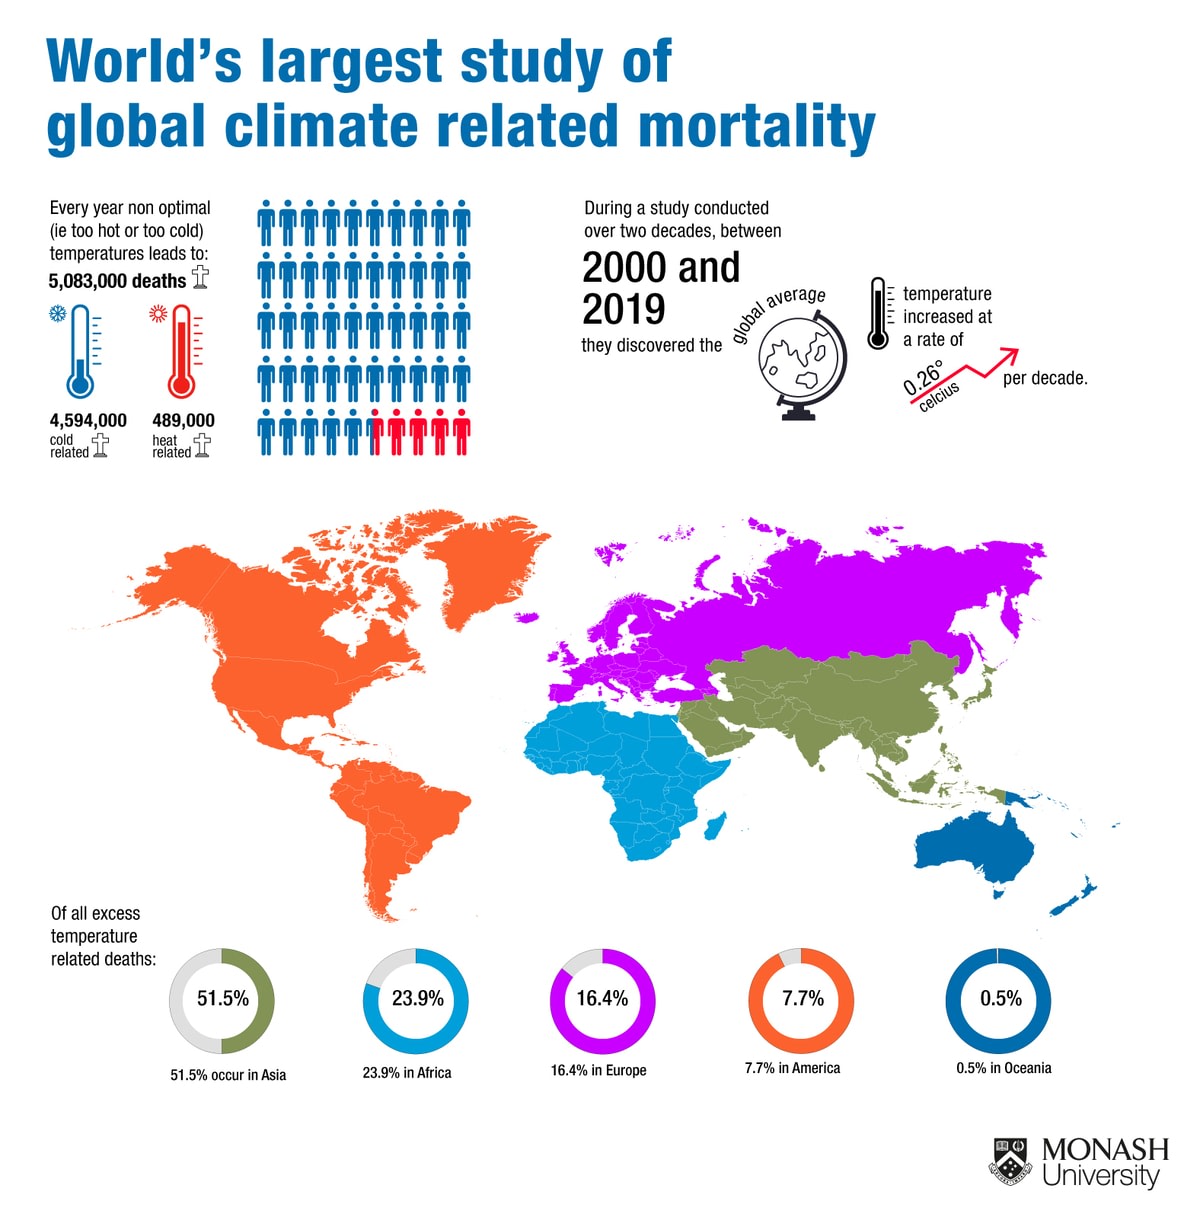 Graph depicting world's largest study of global climate-related mortality